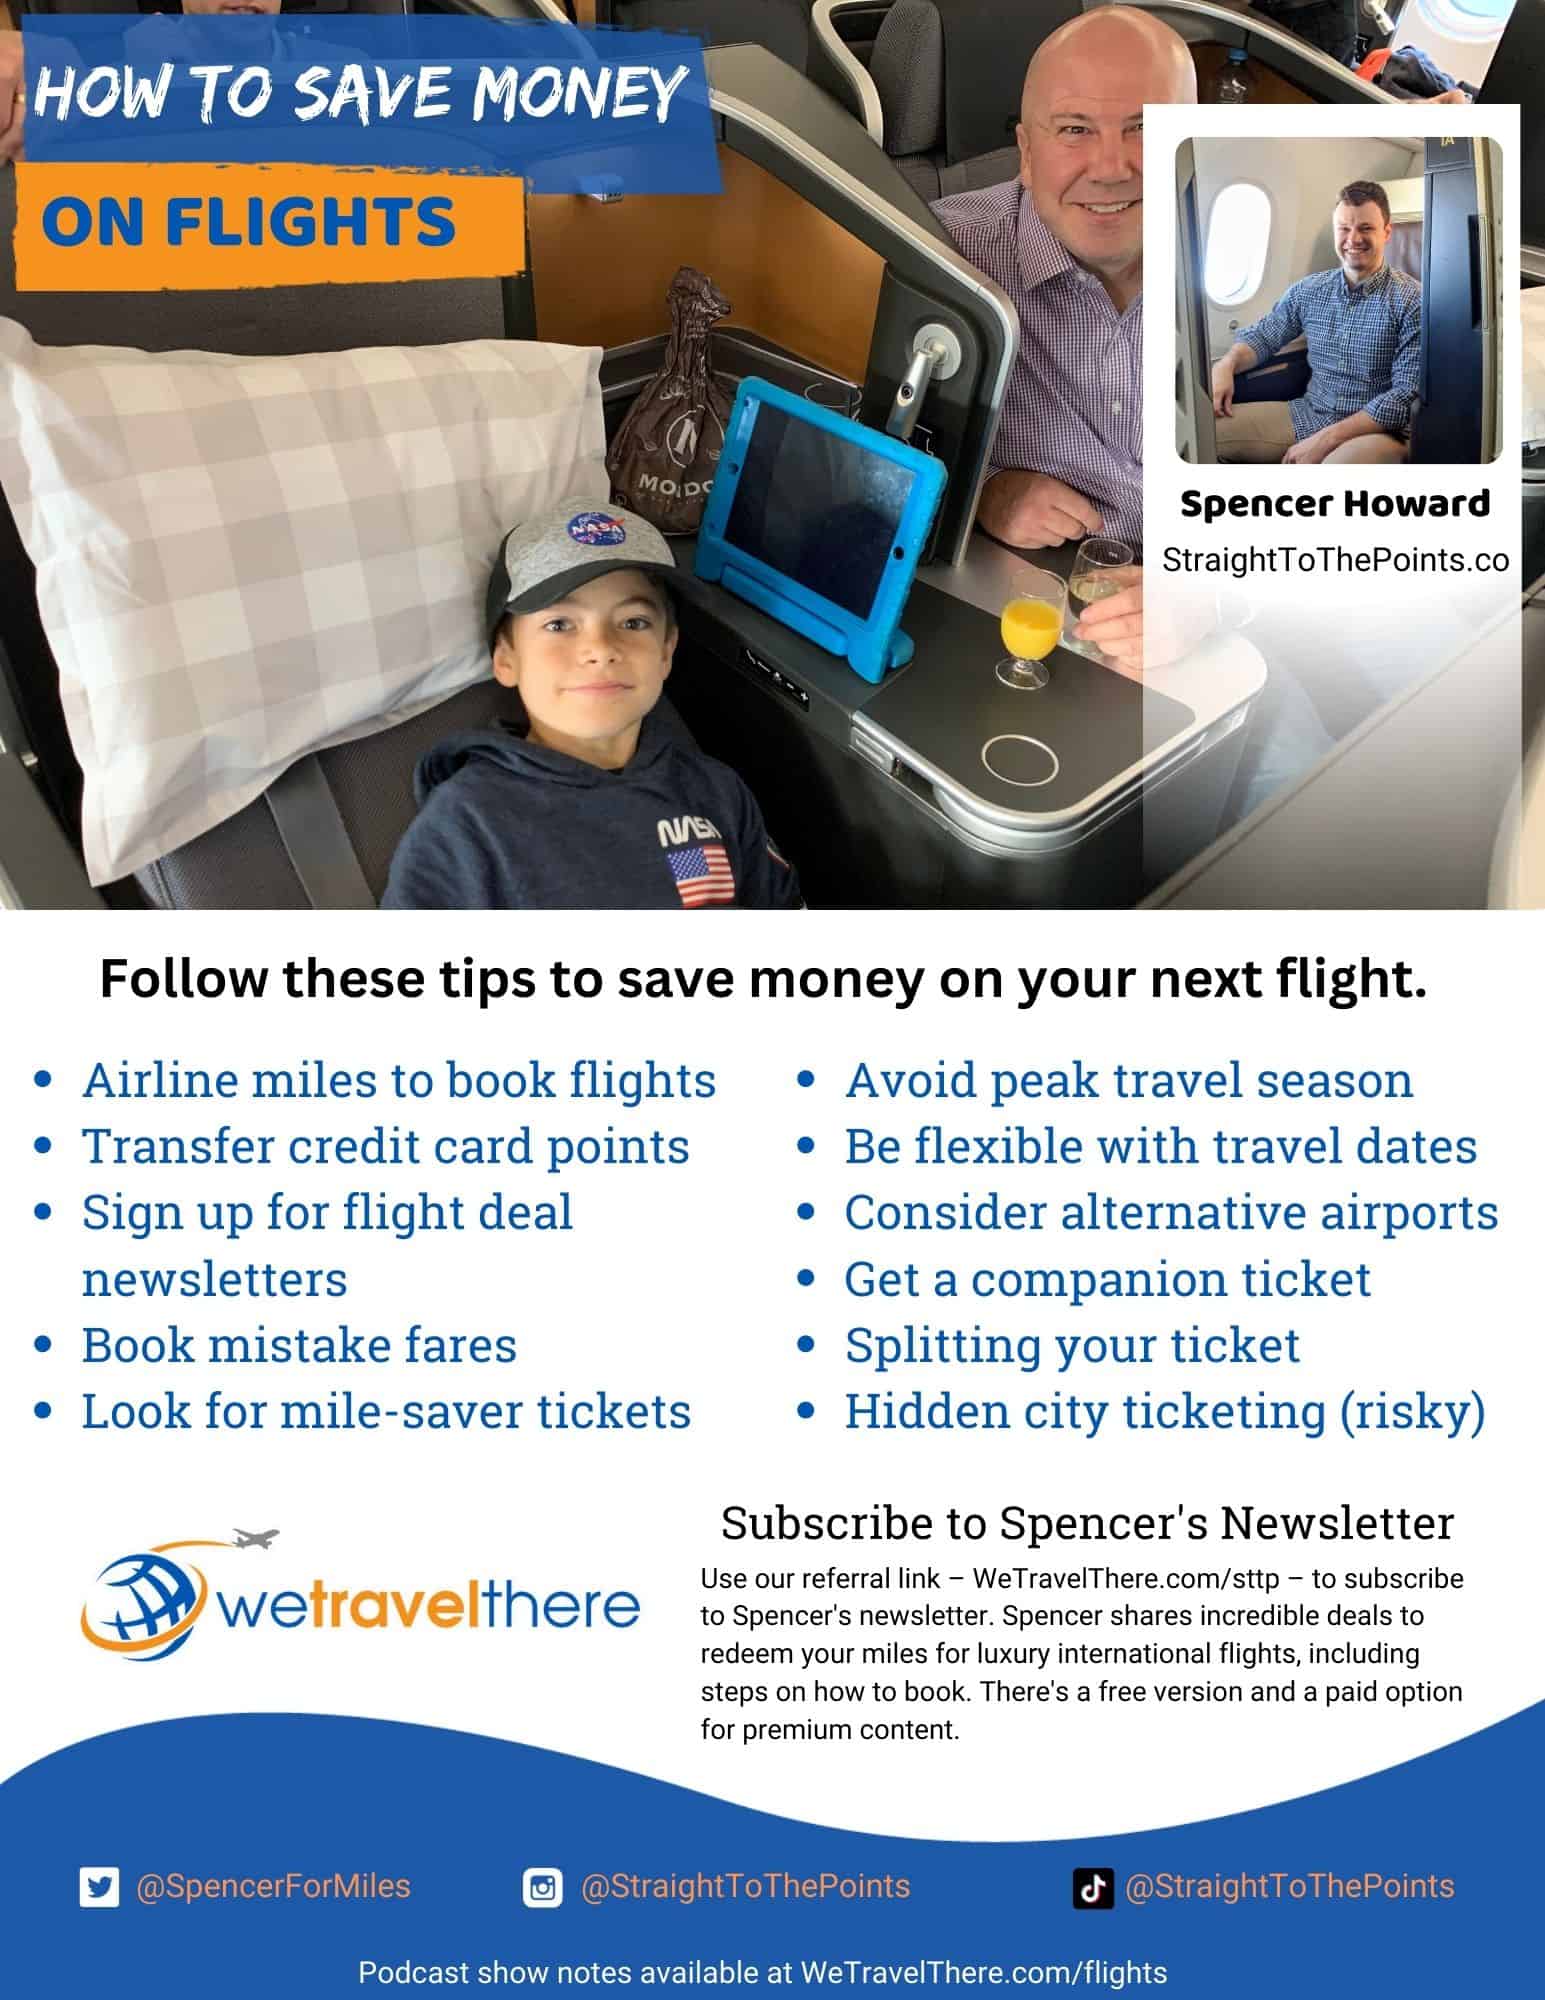 We Travel There - How to save money on flights - Spencer Howard - Podcast one sheet